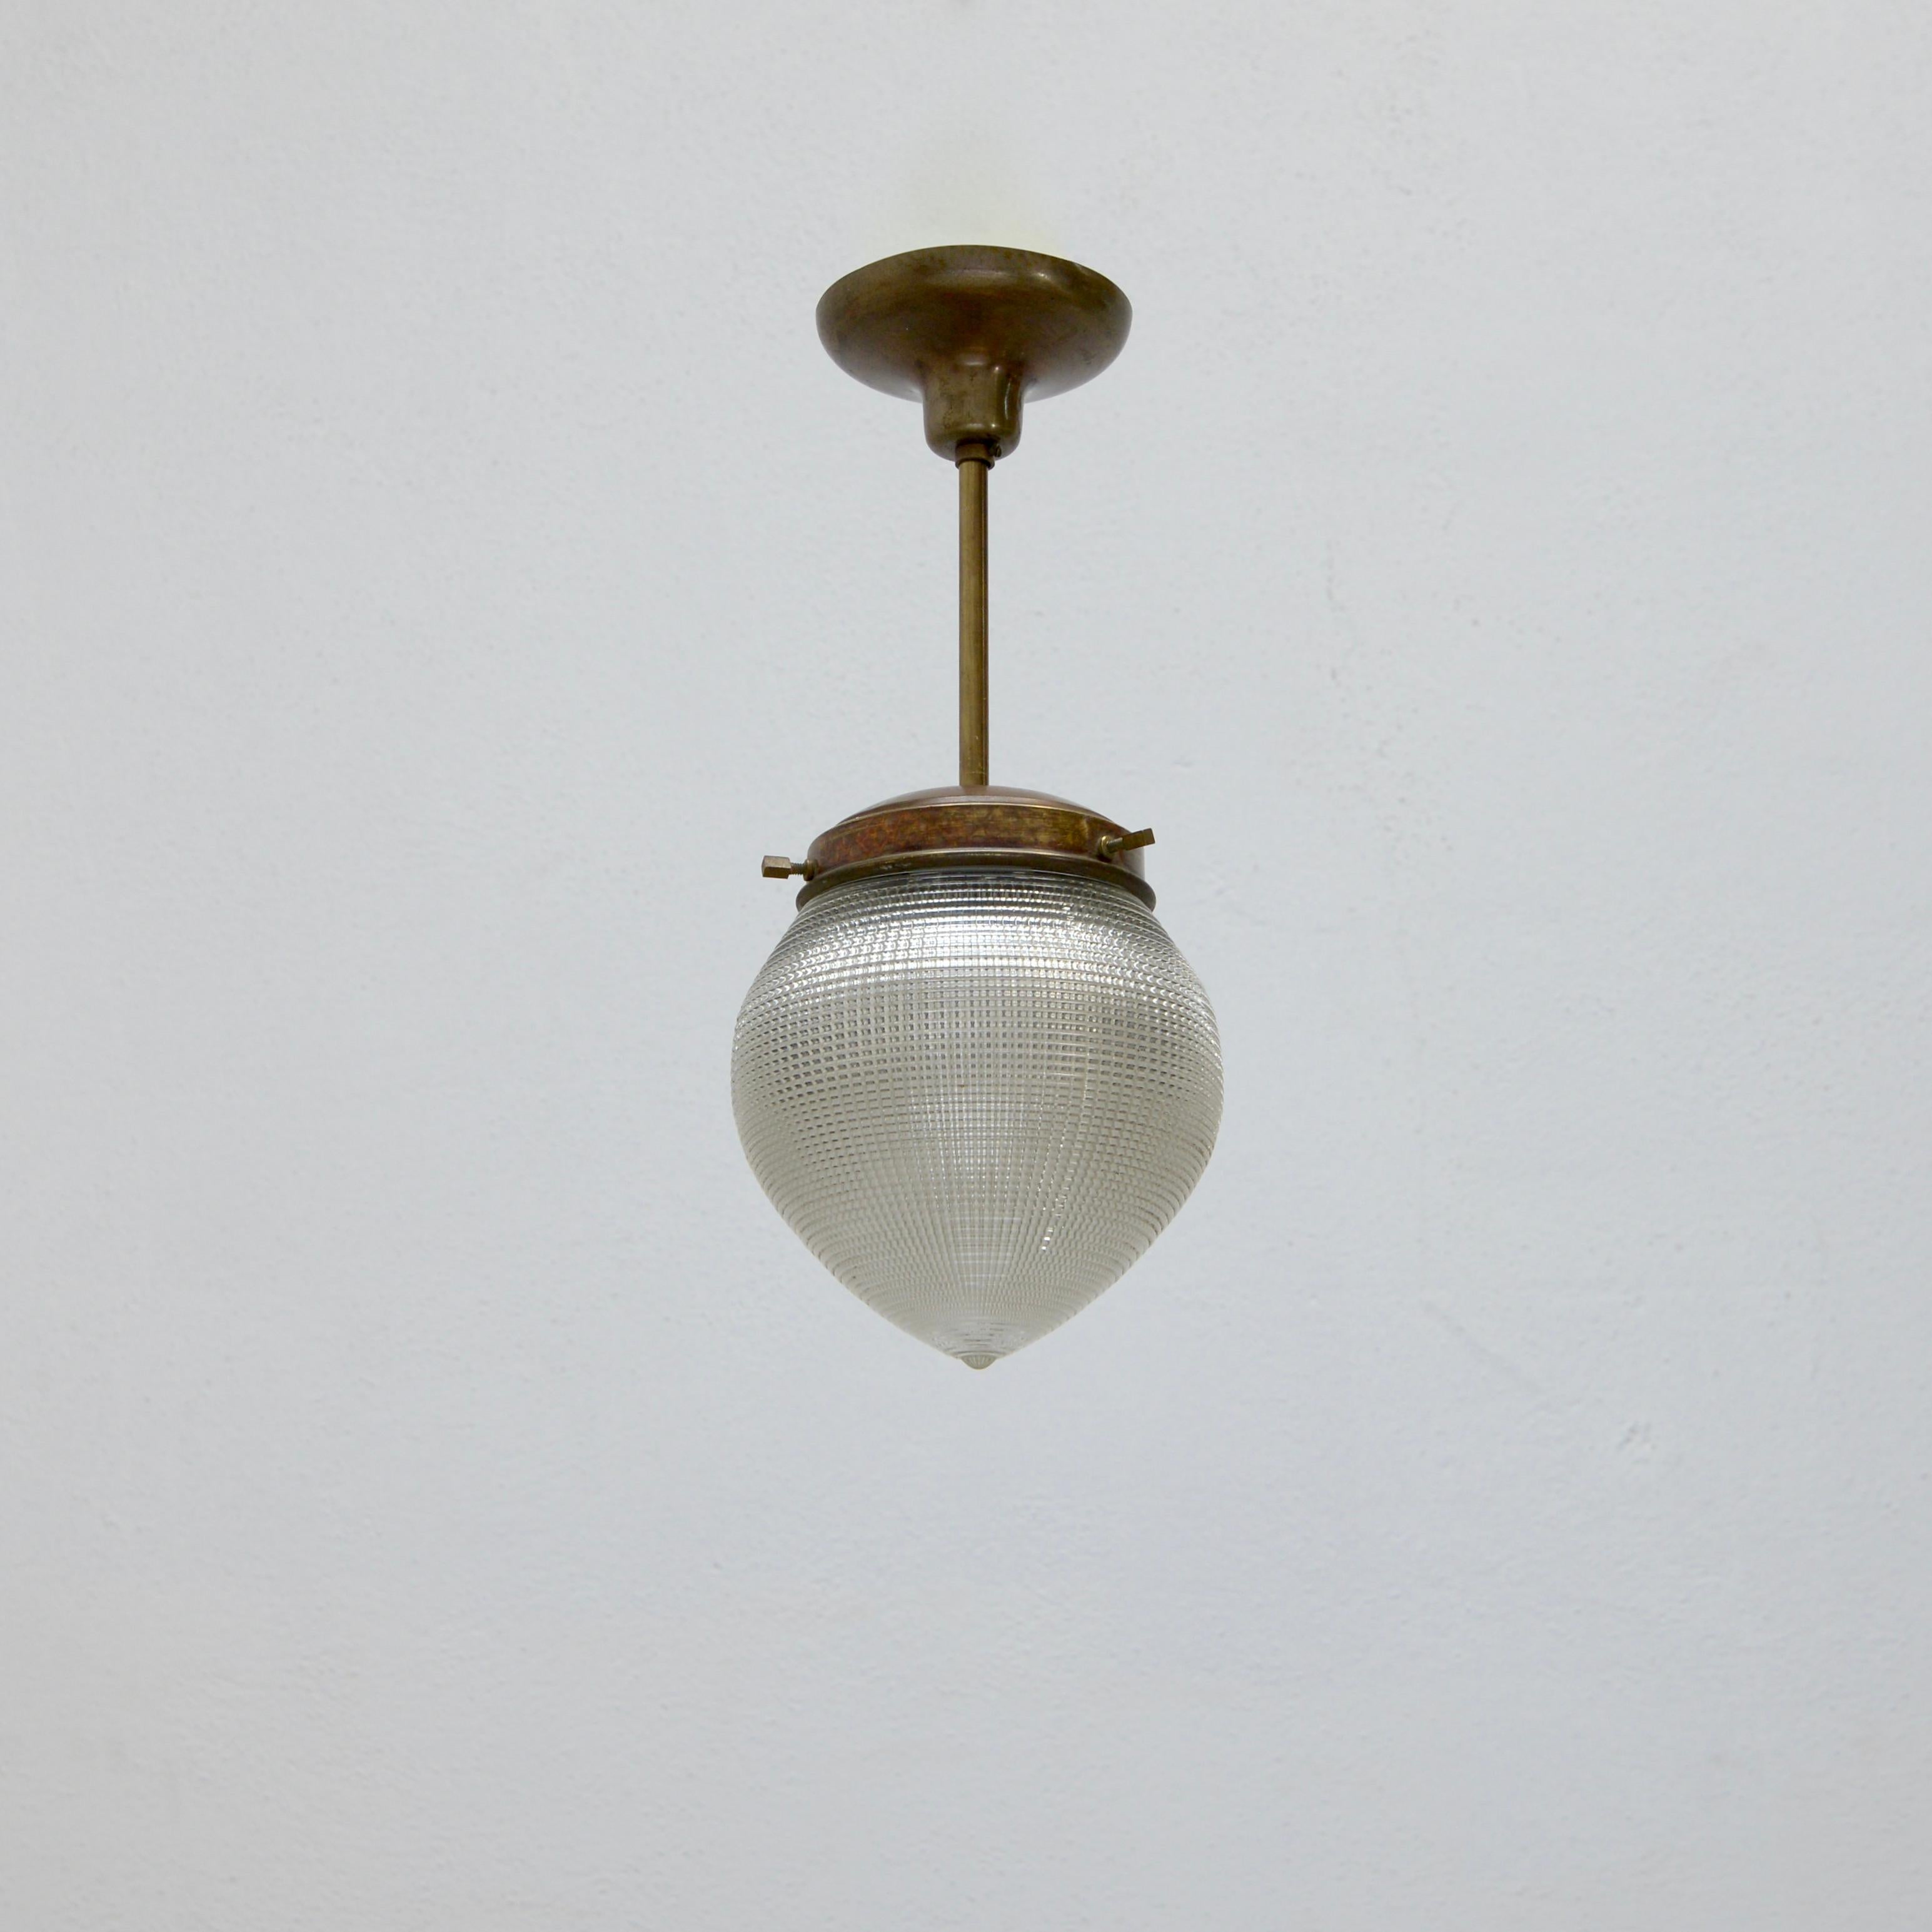 3-Charming 1940s Italian Teardrop Pendants. Partially restored in brass and holophane glass. Wired with 1 E26 medium based socket per pendant and wired for use in the US. Light bulbs included with order. Sold all together as a set.